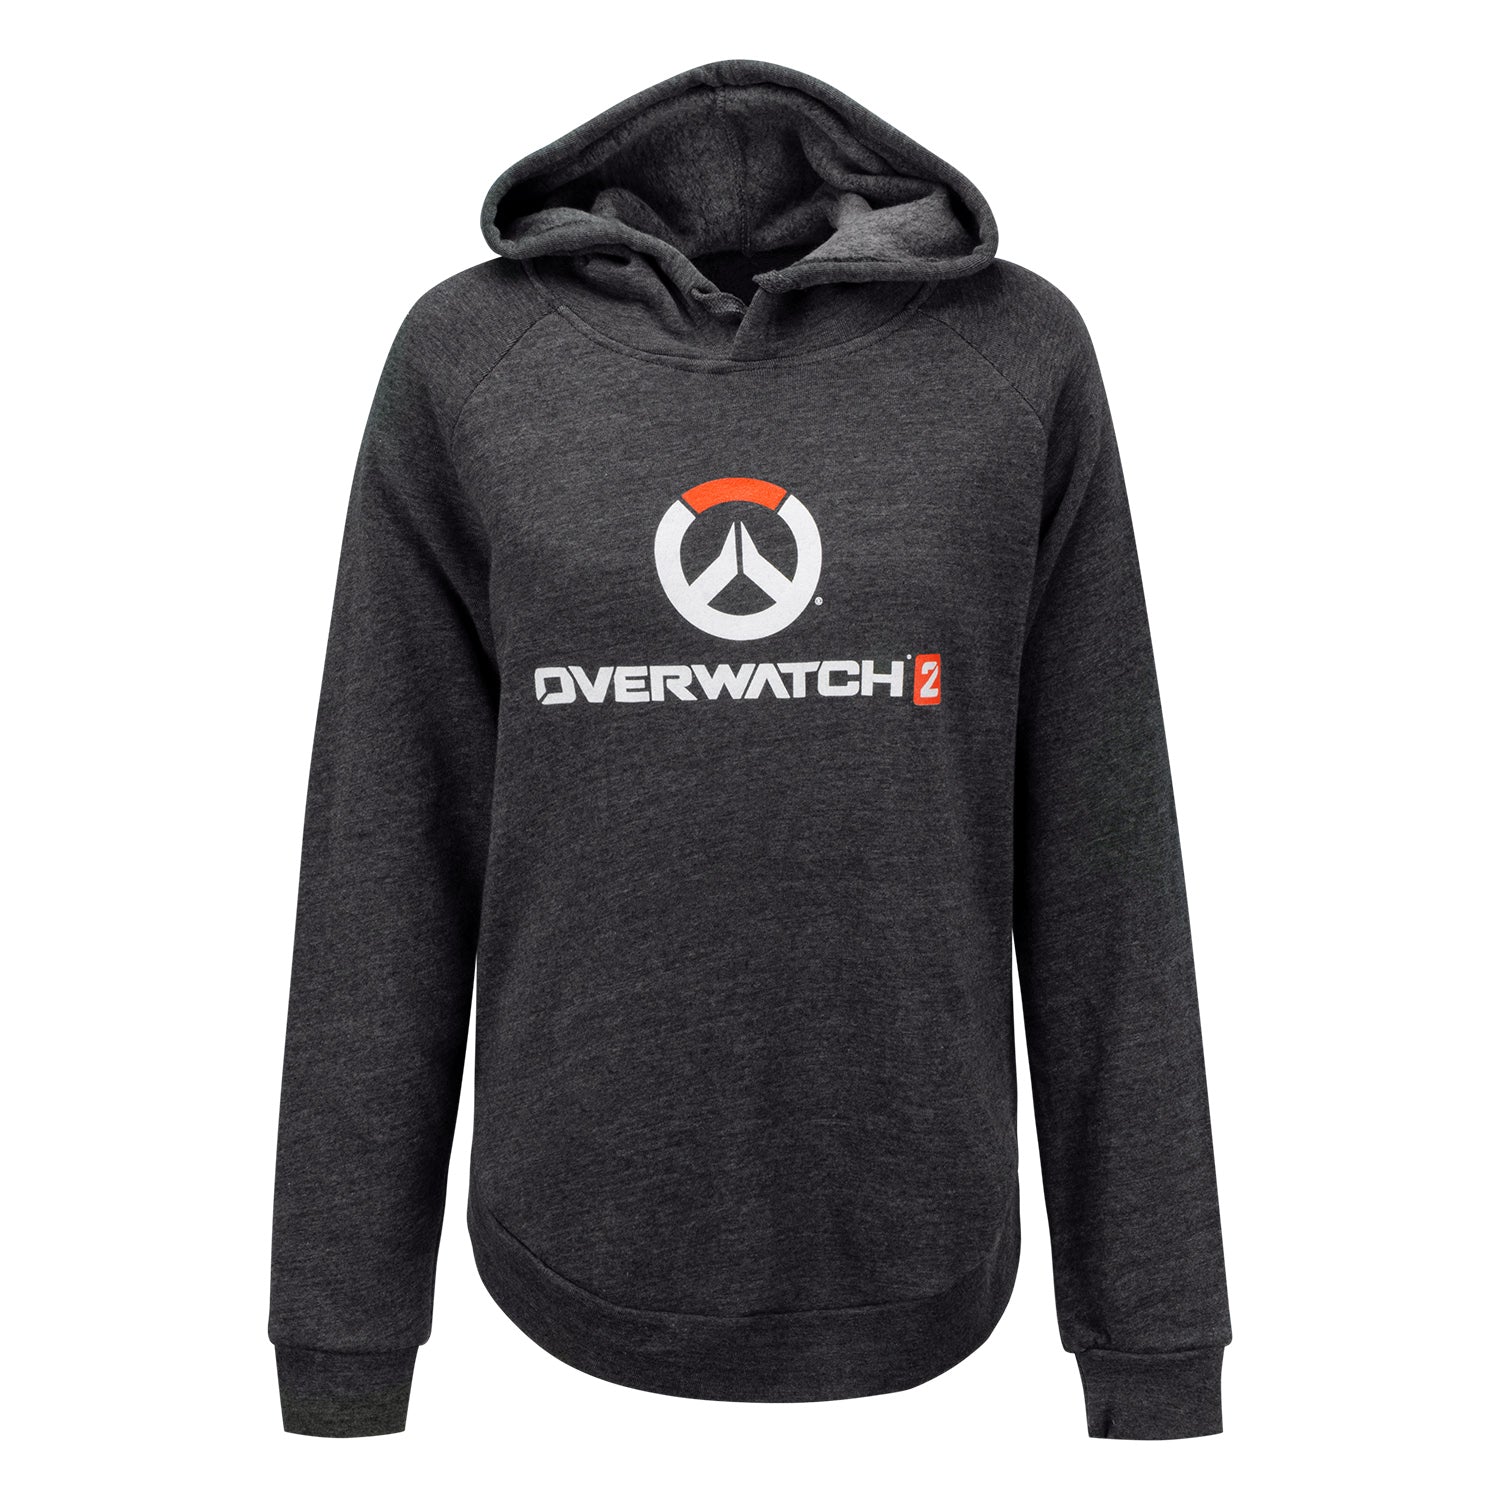 Overwatch 2 Women's Logo Charcoal Hoodie - Front View with Overwatch 2 Logo